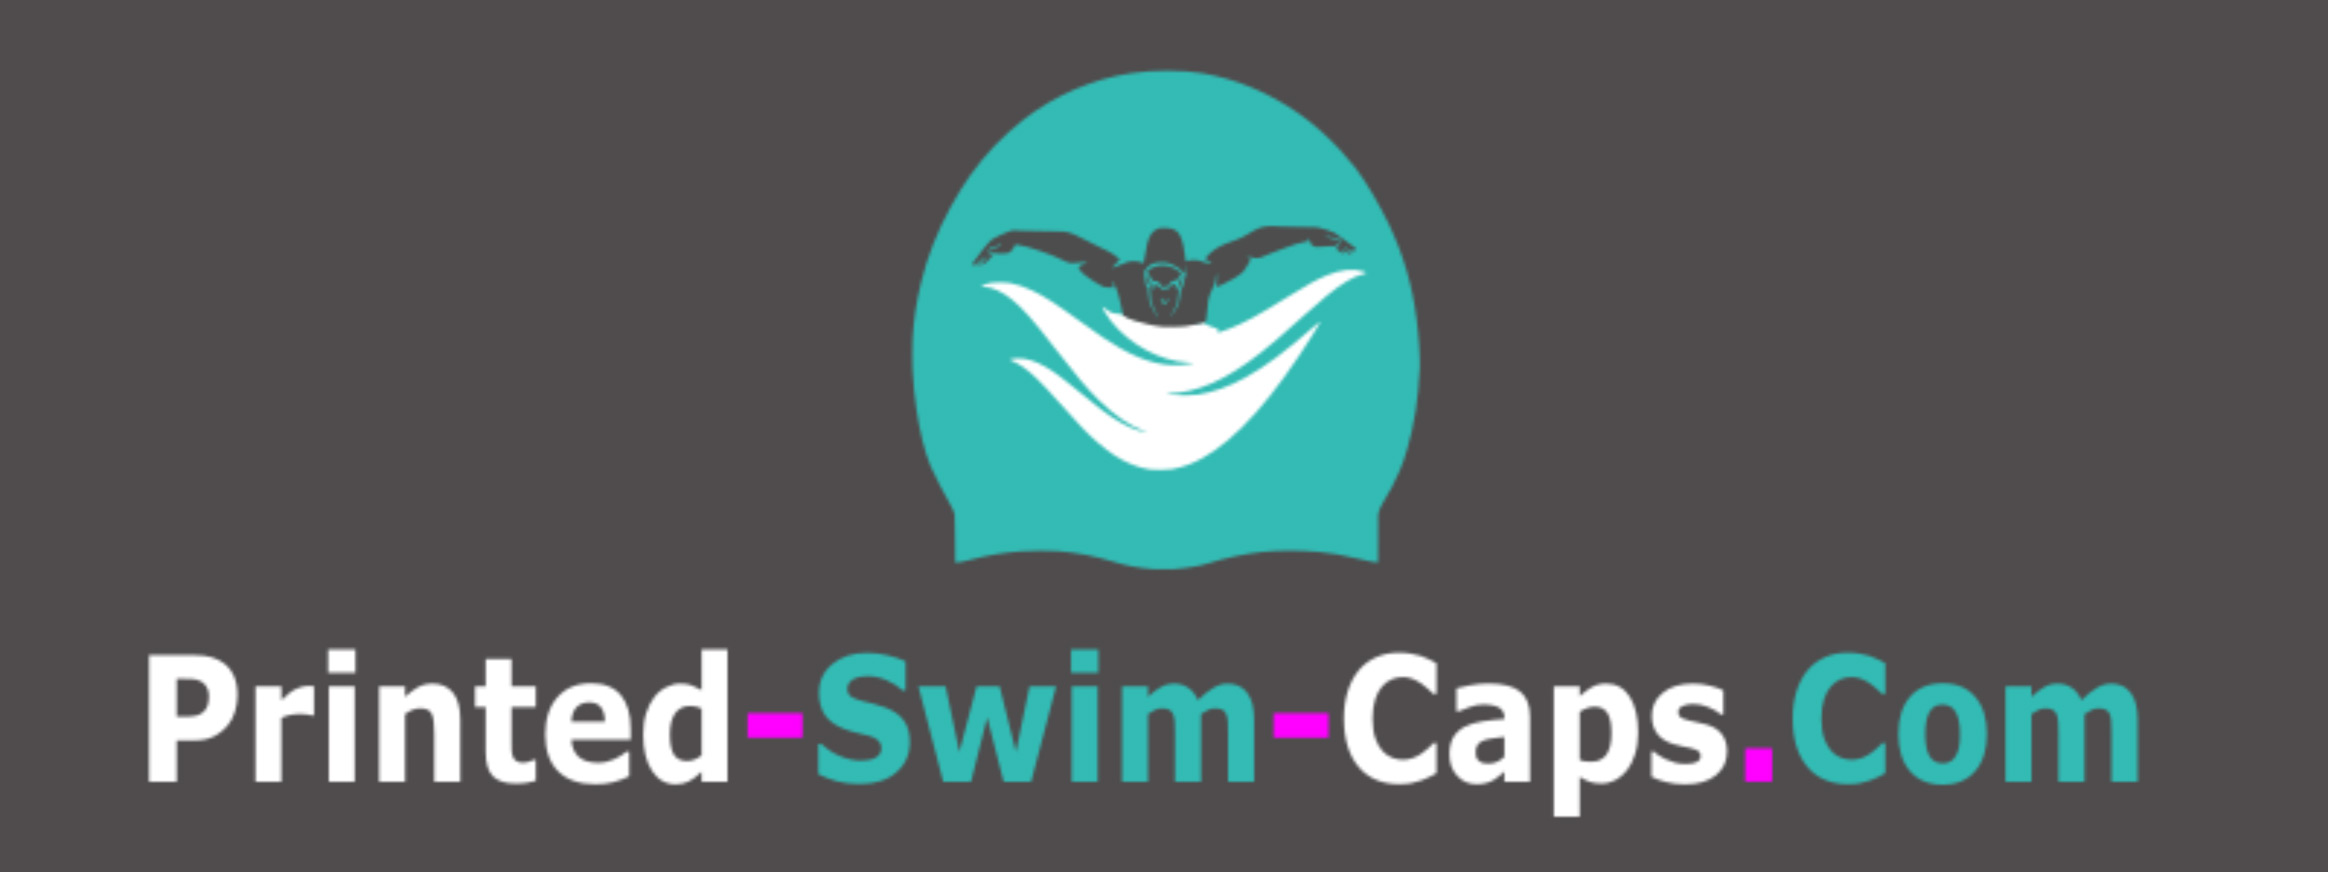 Download Printed Swimming Caps And Customised Team Kit Including ...